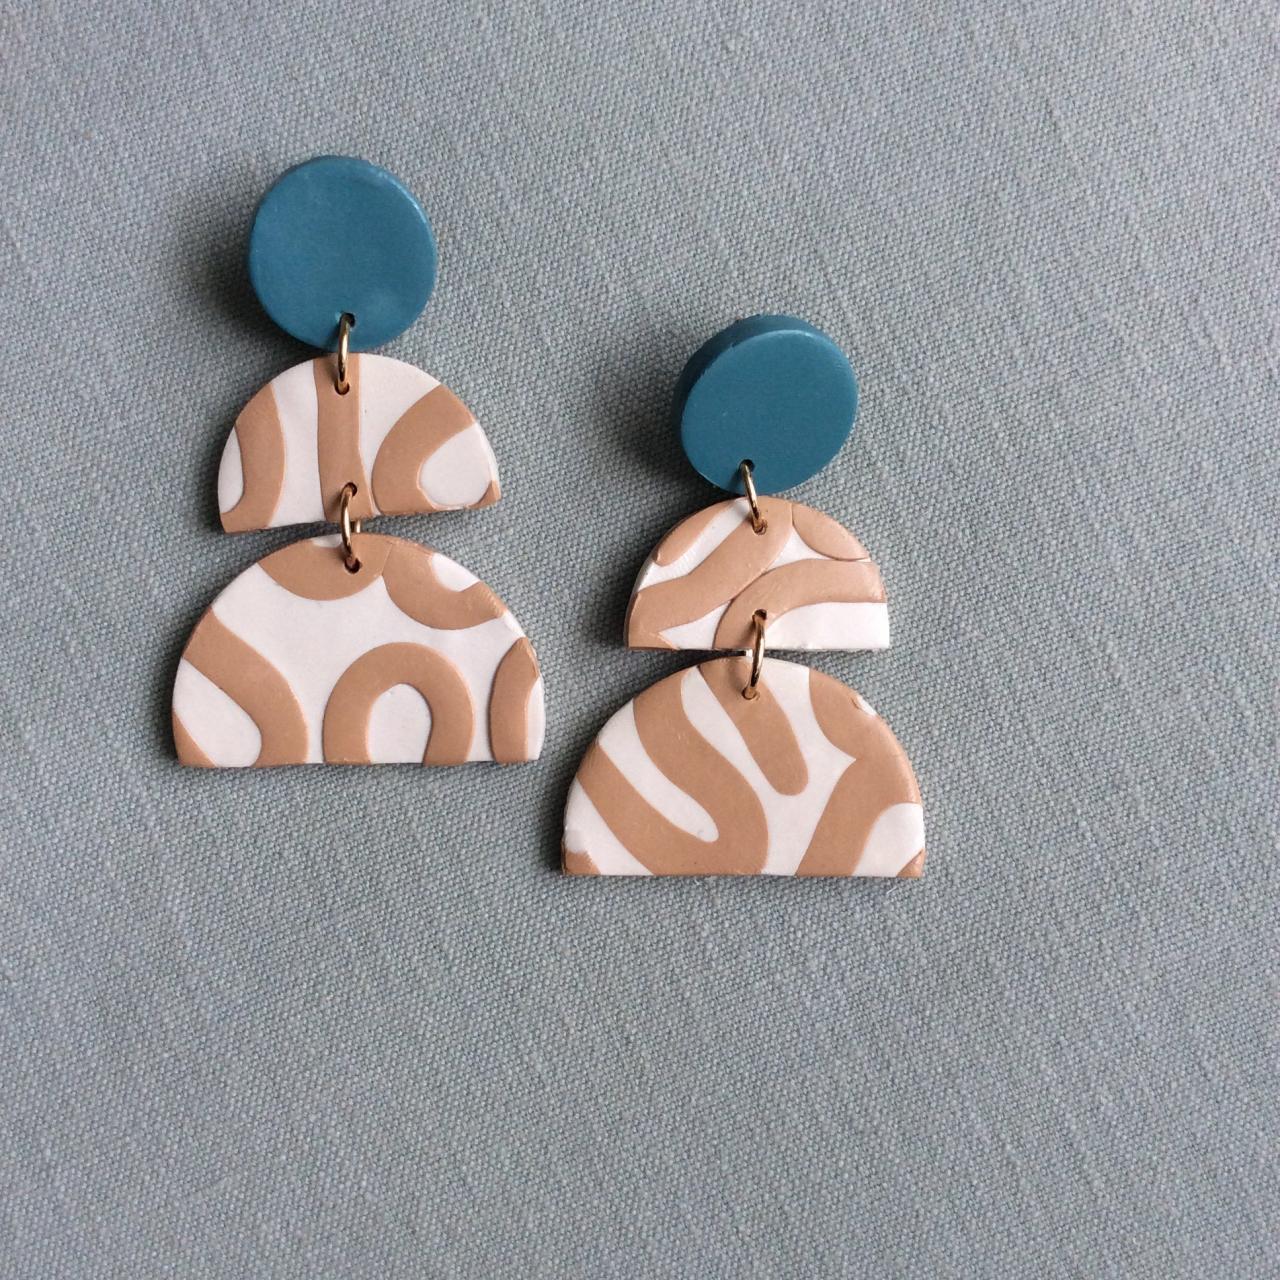 Aurelia In Beige, Cream, And Teal Polymer Clay Statement Earrings | Contemporary Polymer Clay Drop Earrings